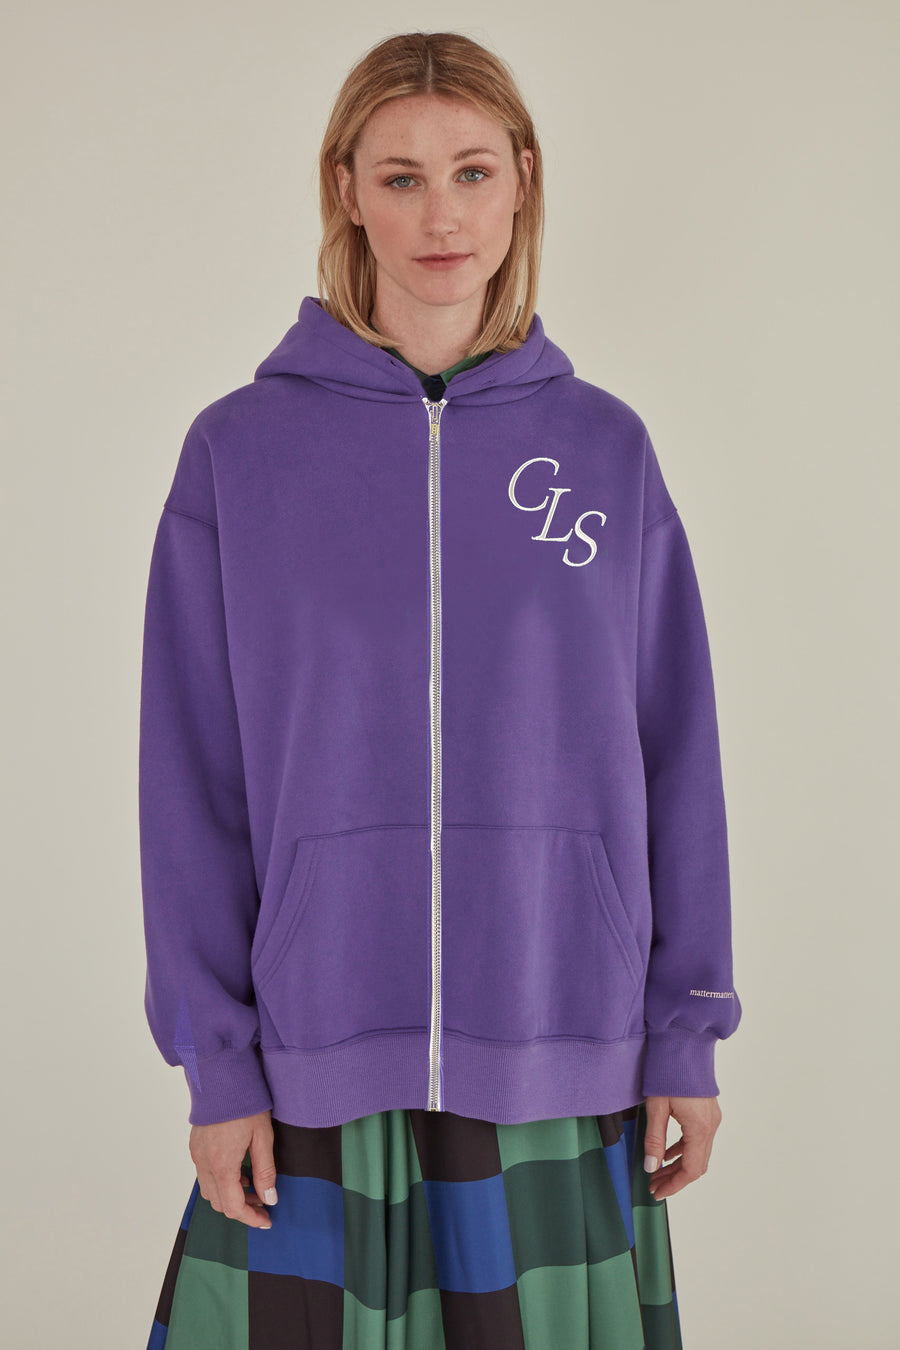 Cultural Leisure Society / Oversized Hoodies